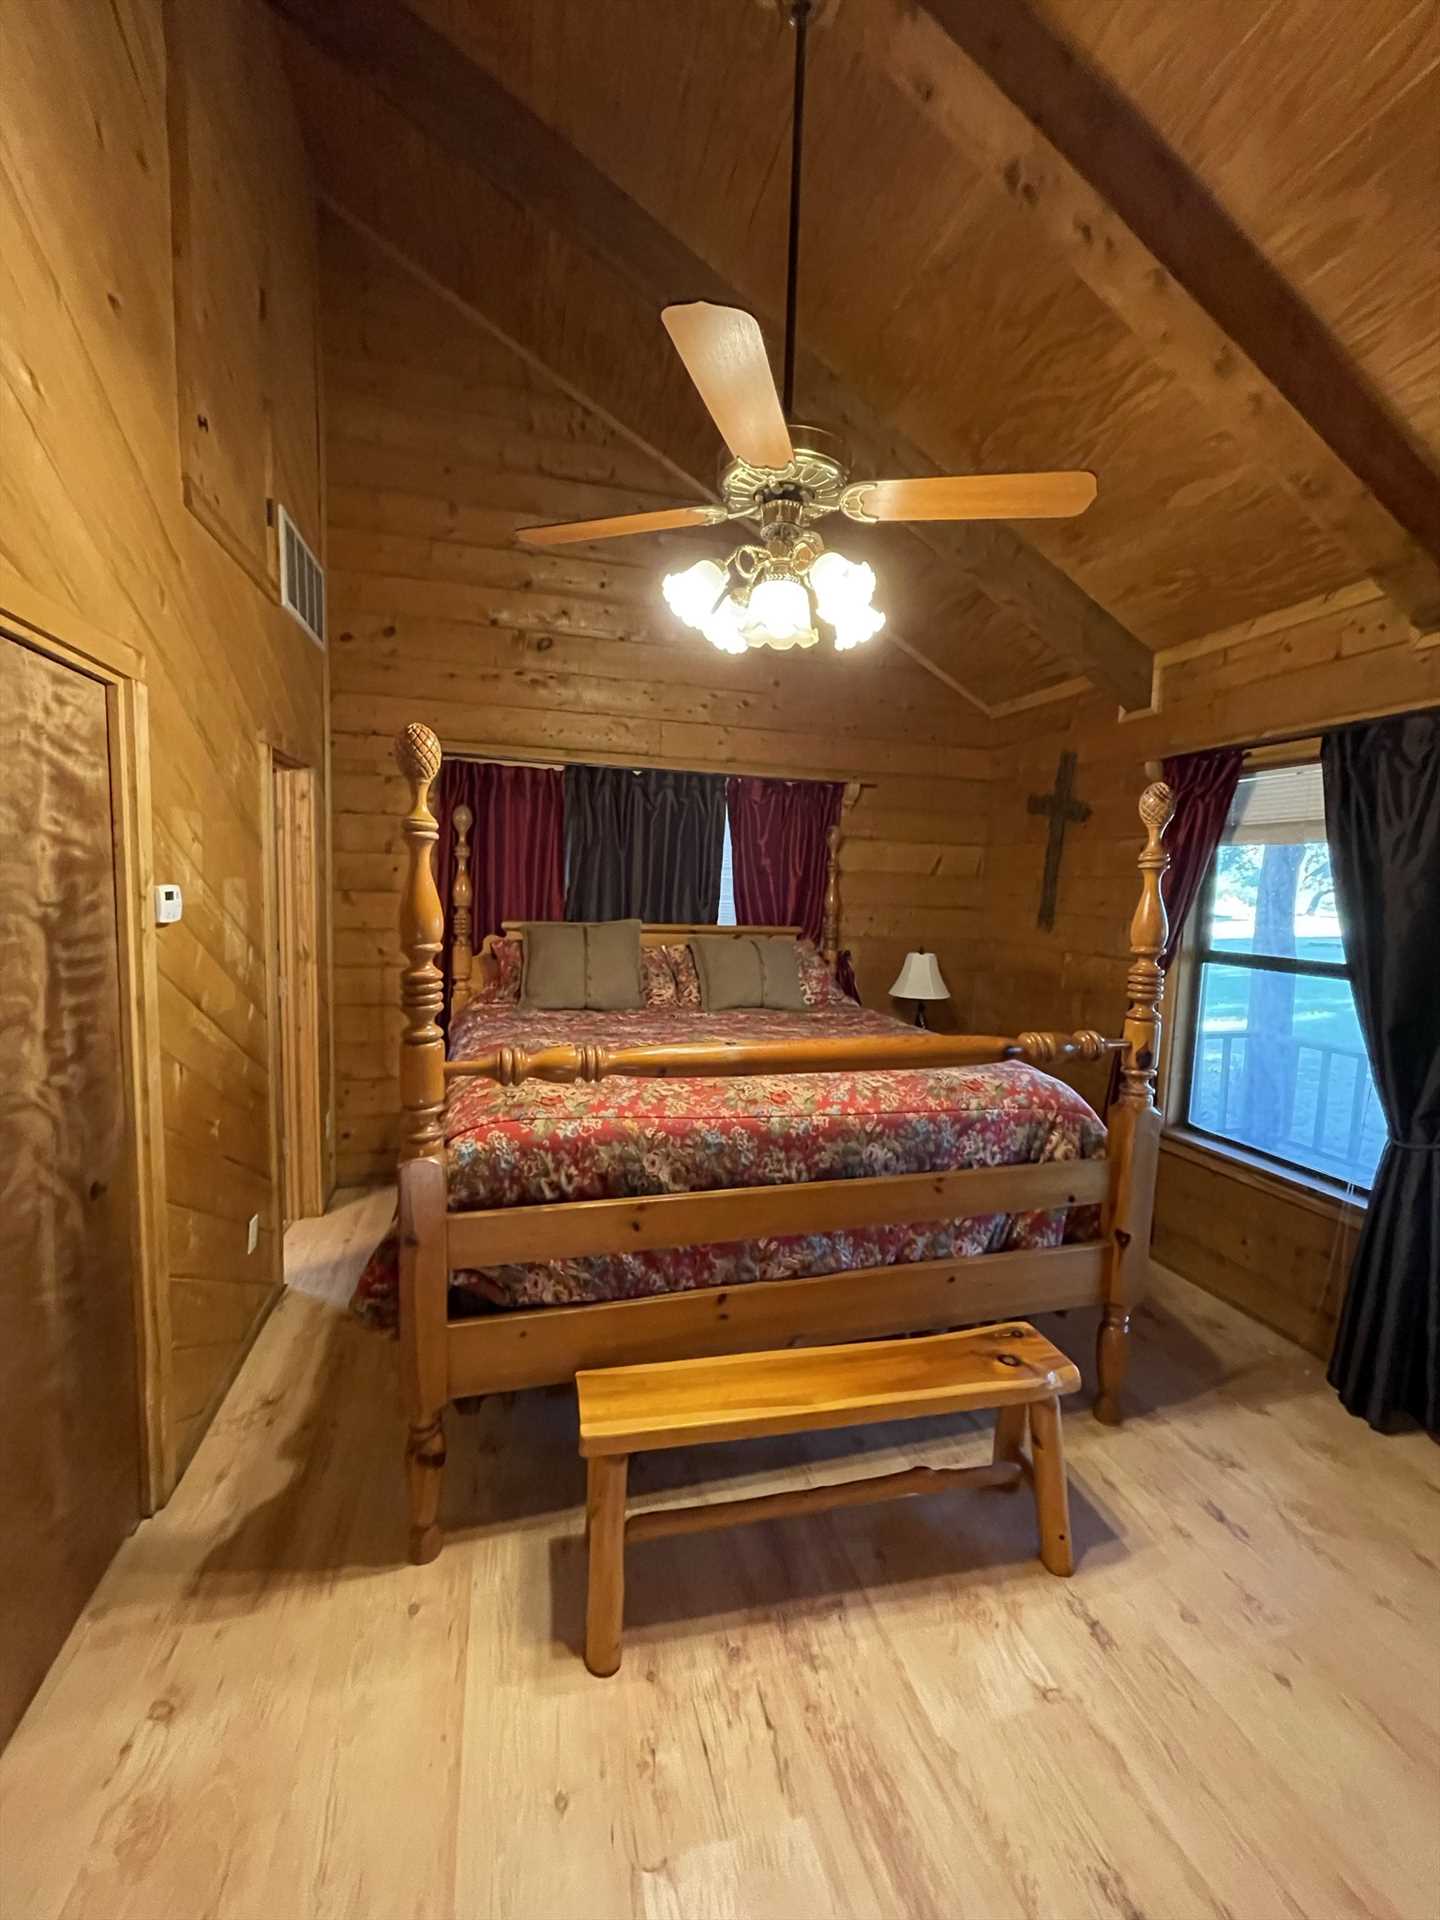                                                 The great big four-poster king bed in the Lodge's master bedroom gives a whole new meaning to country comfort! Let us know if you'd like clean bed and bath linens included with your stay.